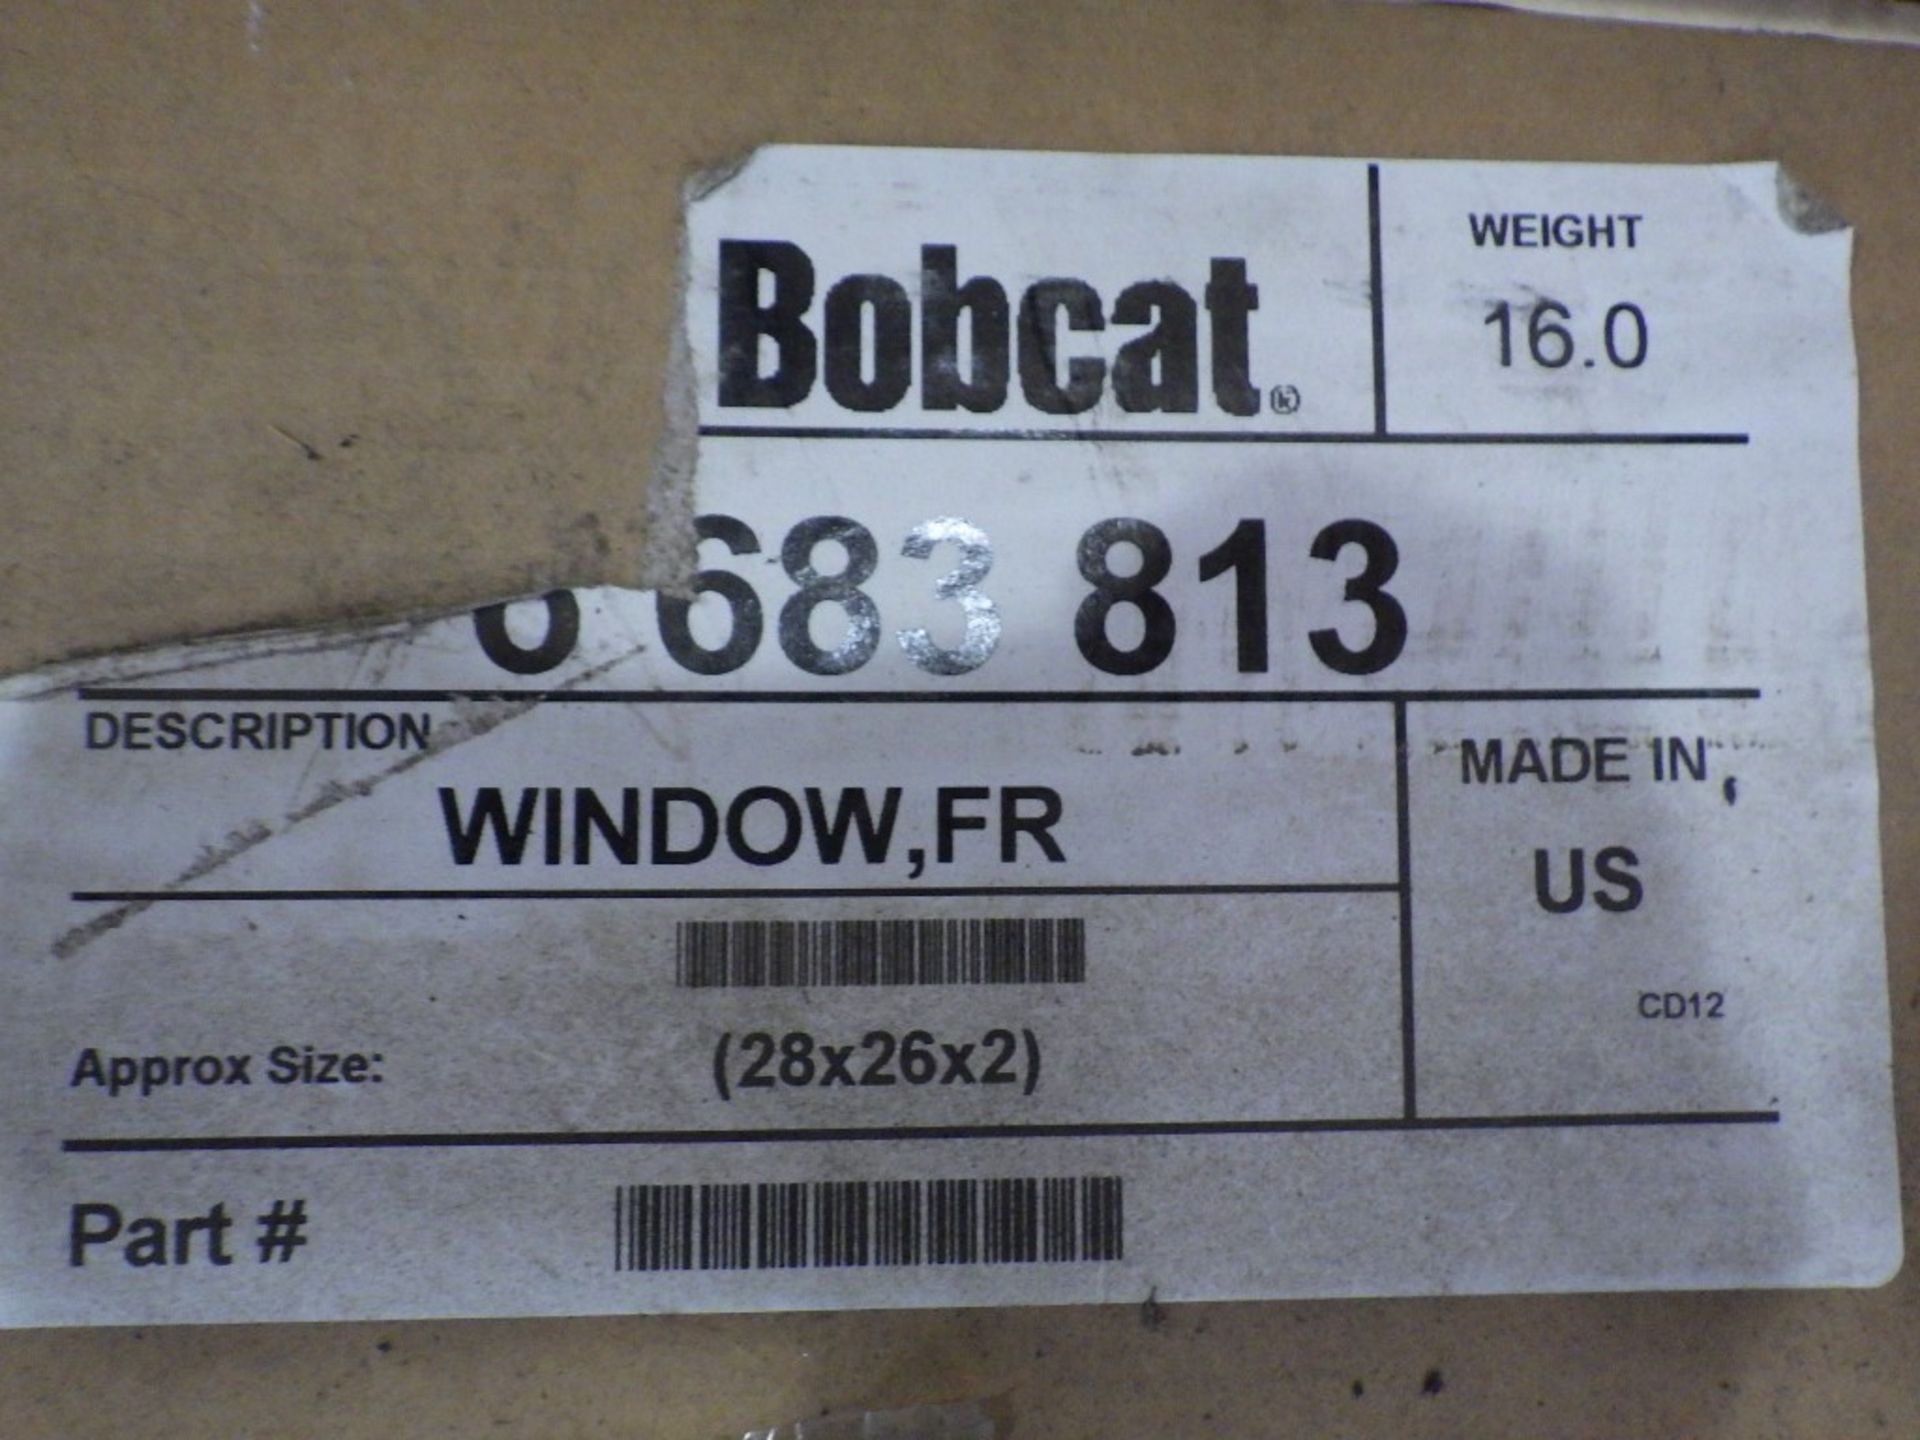 ASSORTED BOBCAT GLASS & MIRROR KIT P/N: 7173148, 6811918, M6805903, 6683813, 7155308 (2 OF) - Image 9 of 11